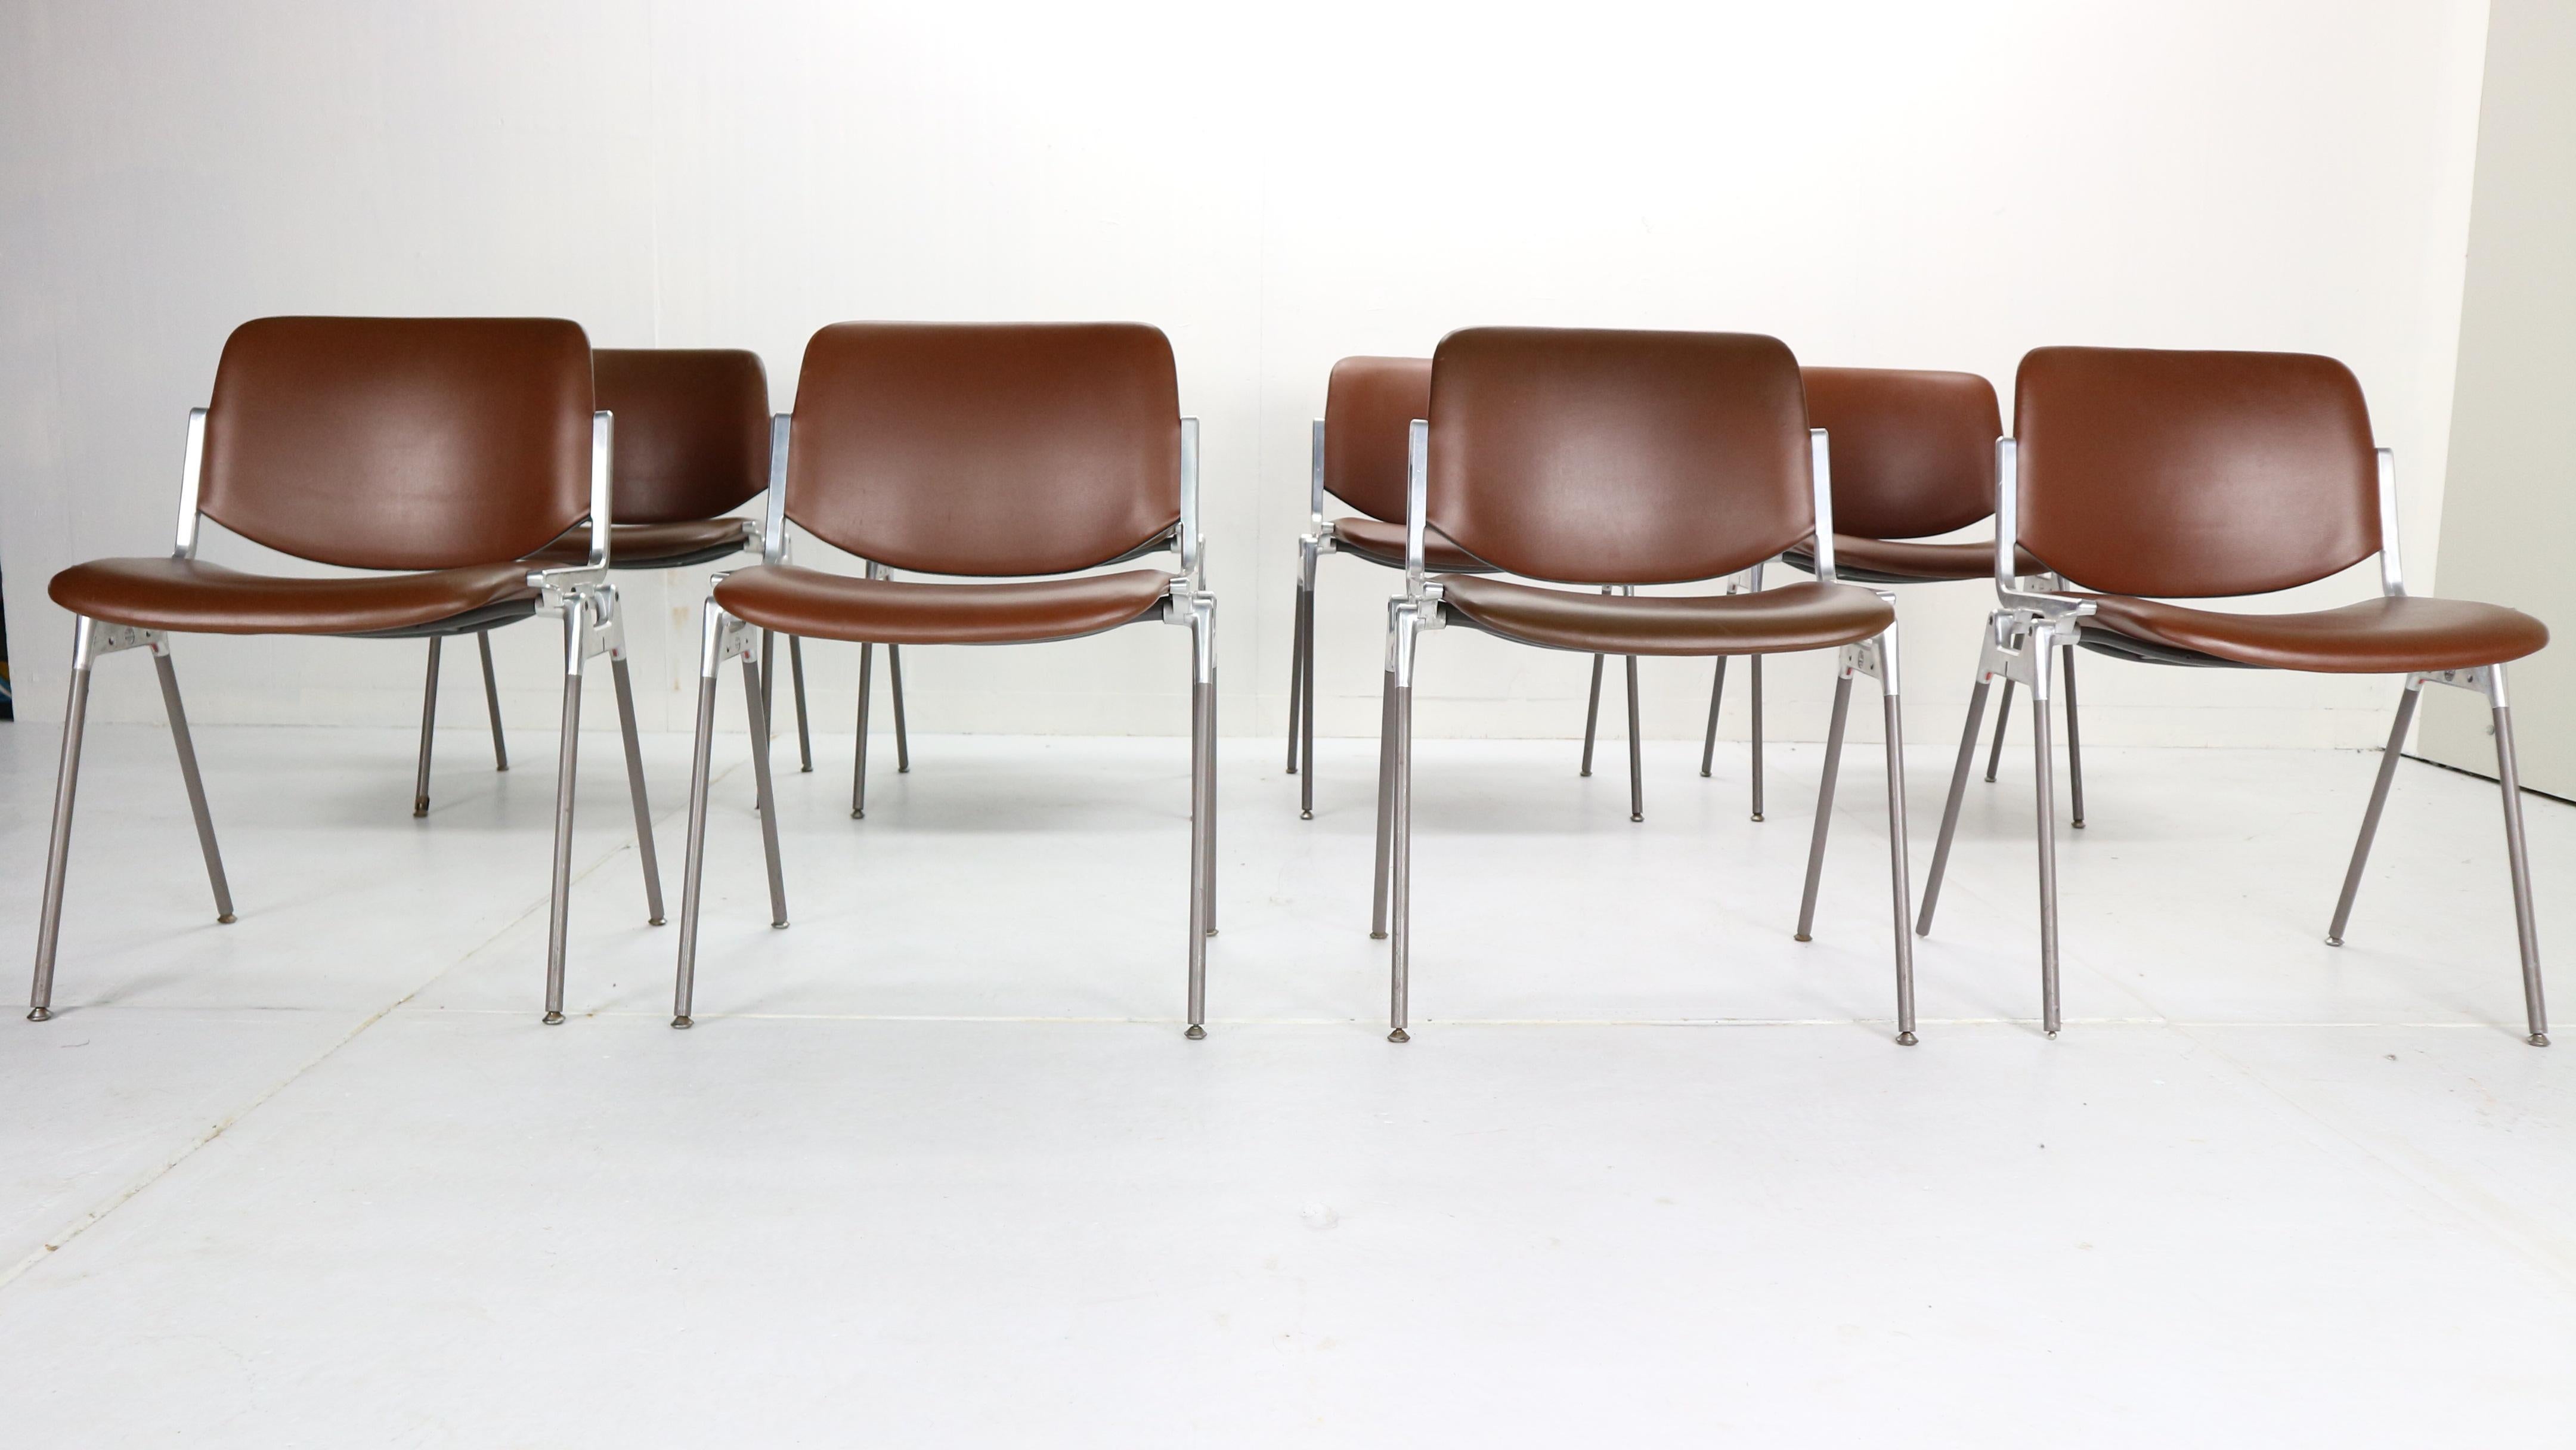 Set of 8 dining or desk chairs designed by Giancarlo Piretti and manufactured for Castelli & Anonima Castelli, 1960s, Italy.
Model- DSC 106, originally marked.
Chairs are made of aluminum steel frames. The seat is covered in brown faux leather and